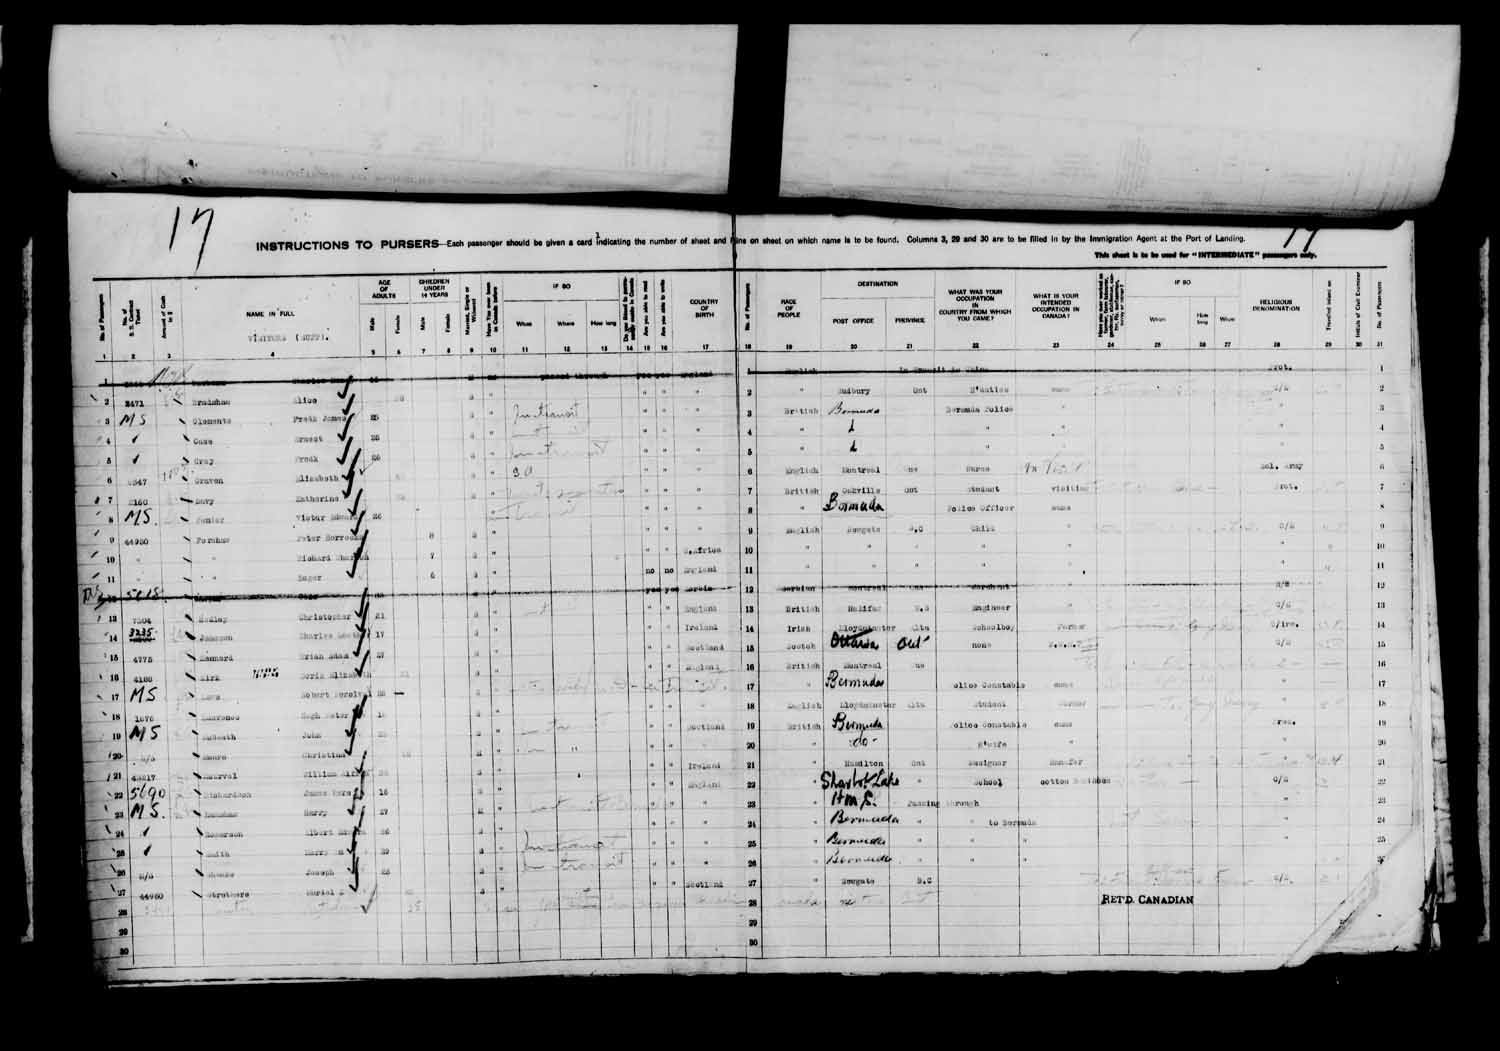 Digitized page of Passenger Lists for Image No.: e003610624